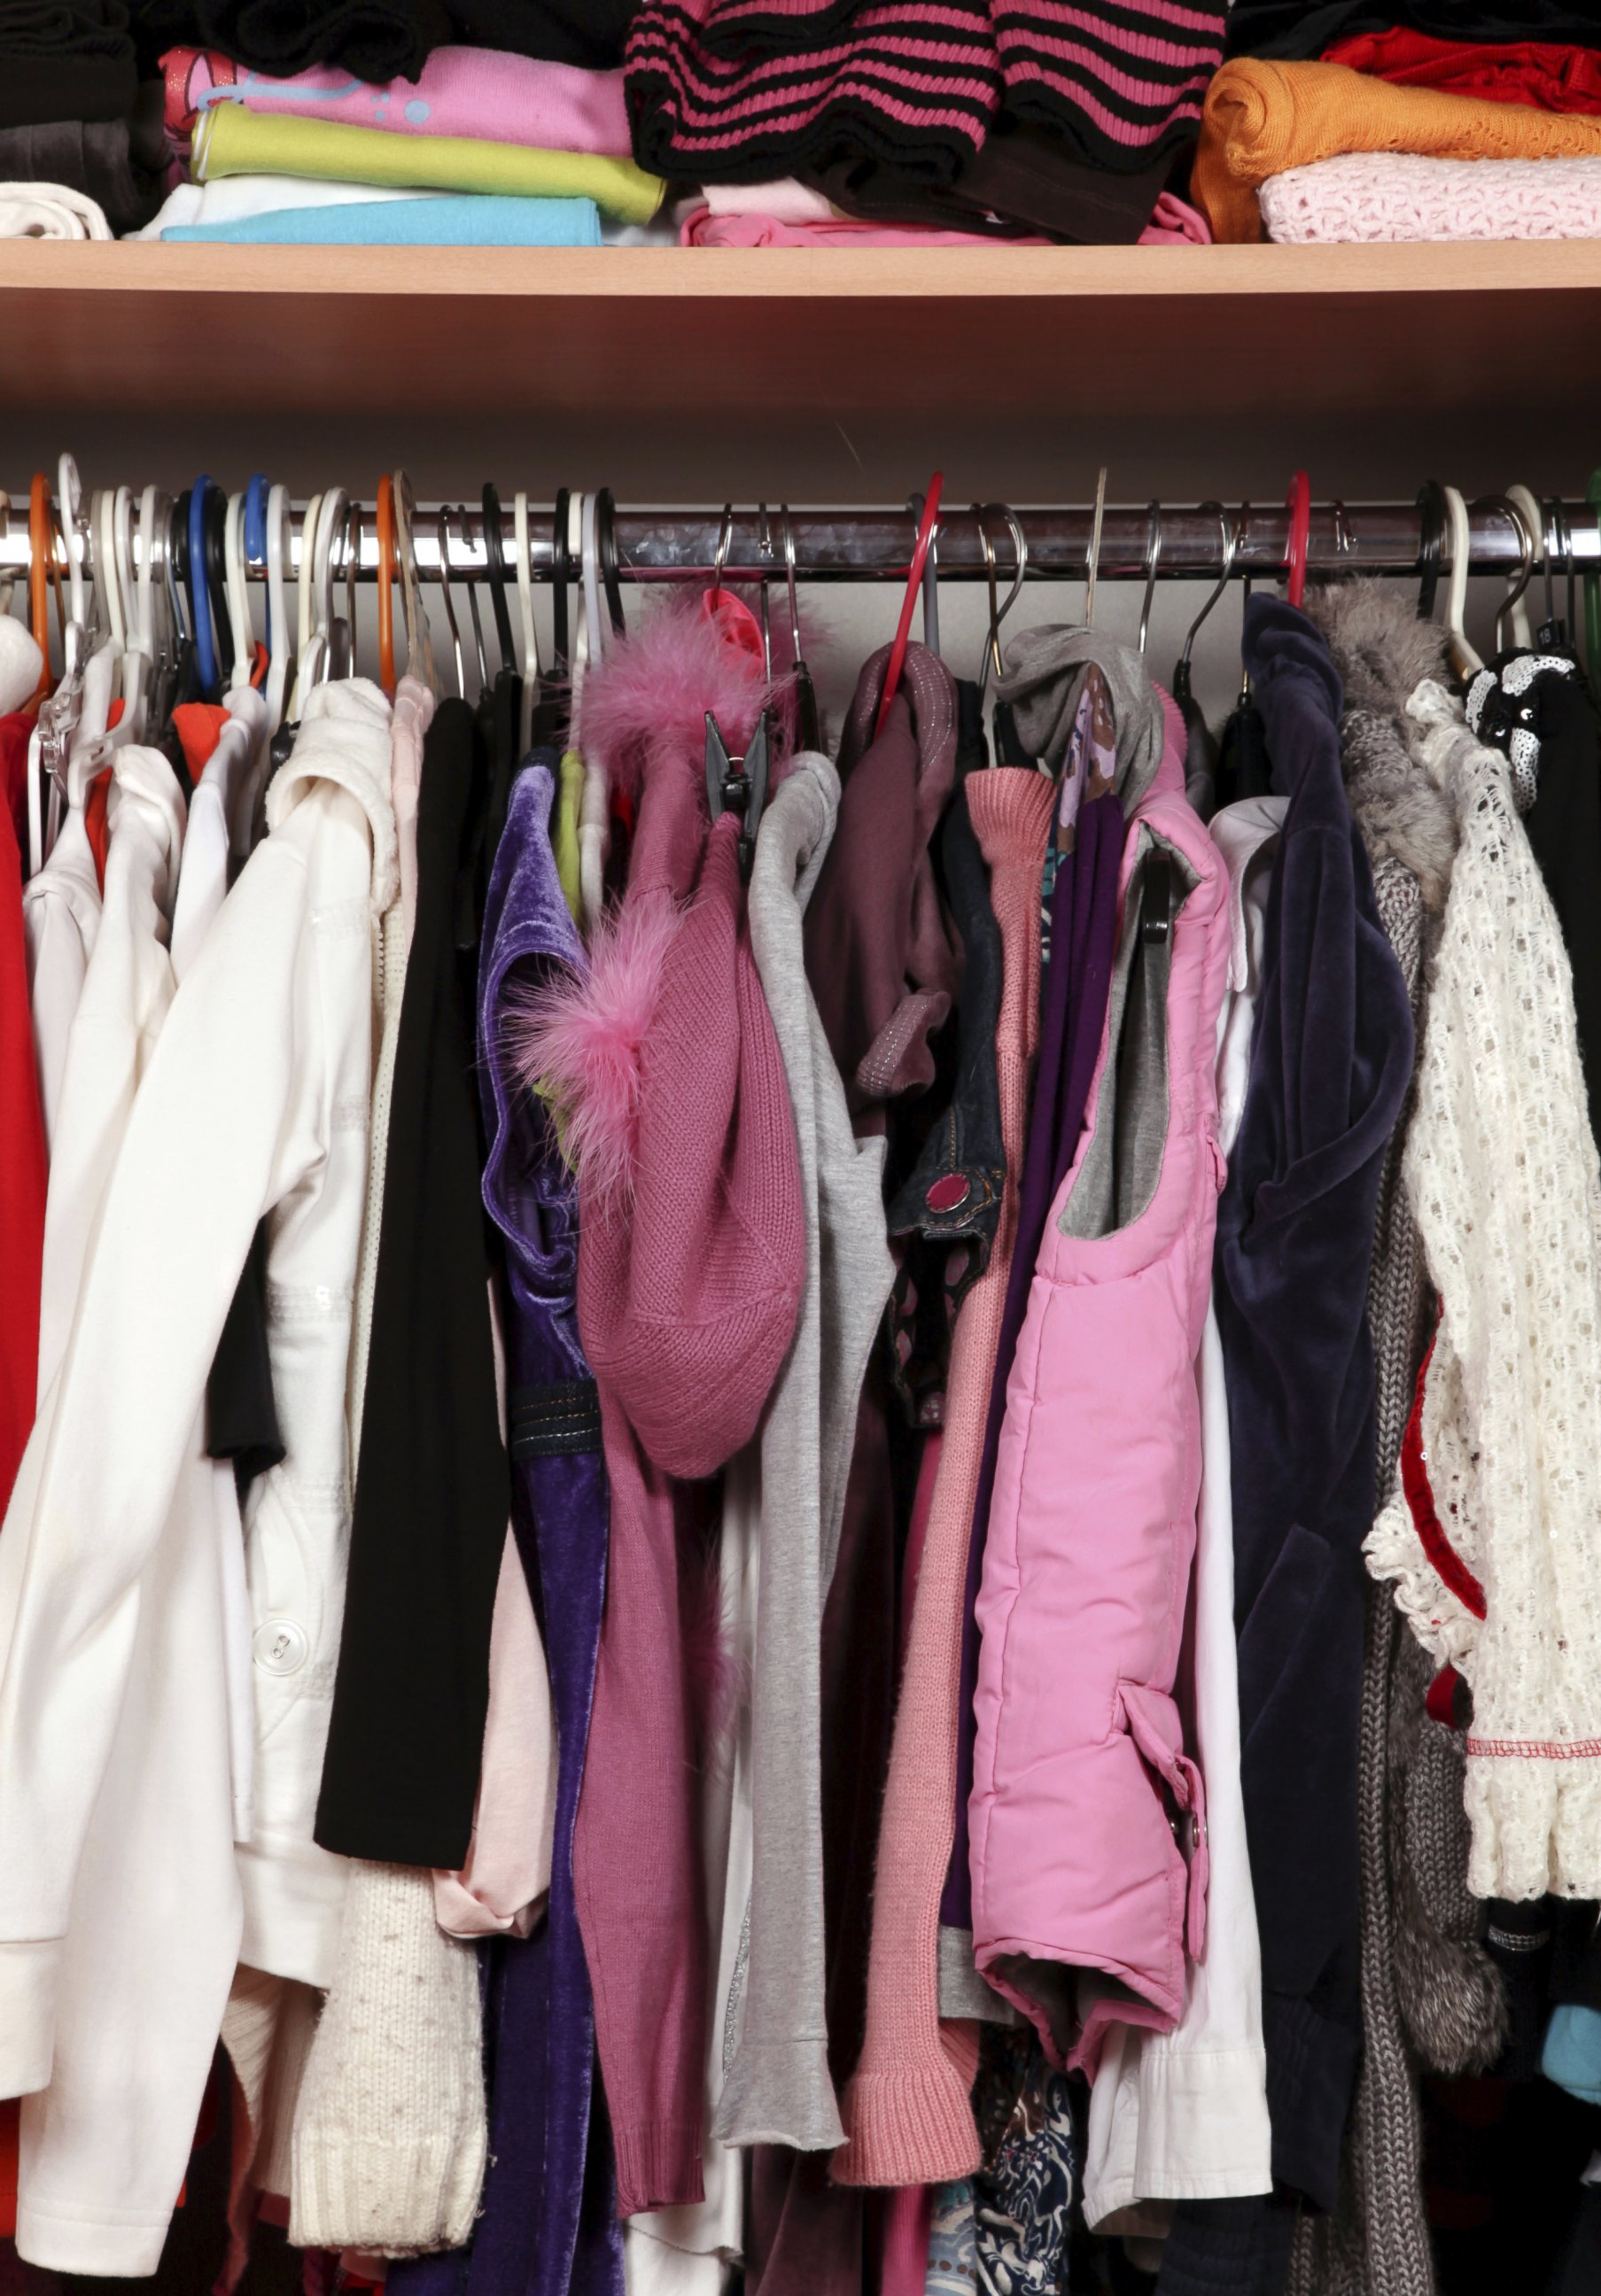 PHOTO: A closet is seen in this undated stock photo. 